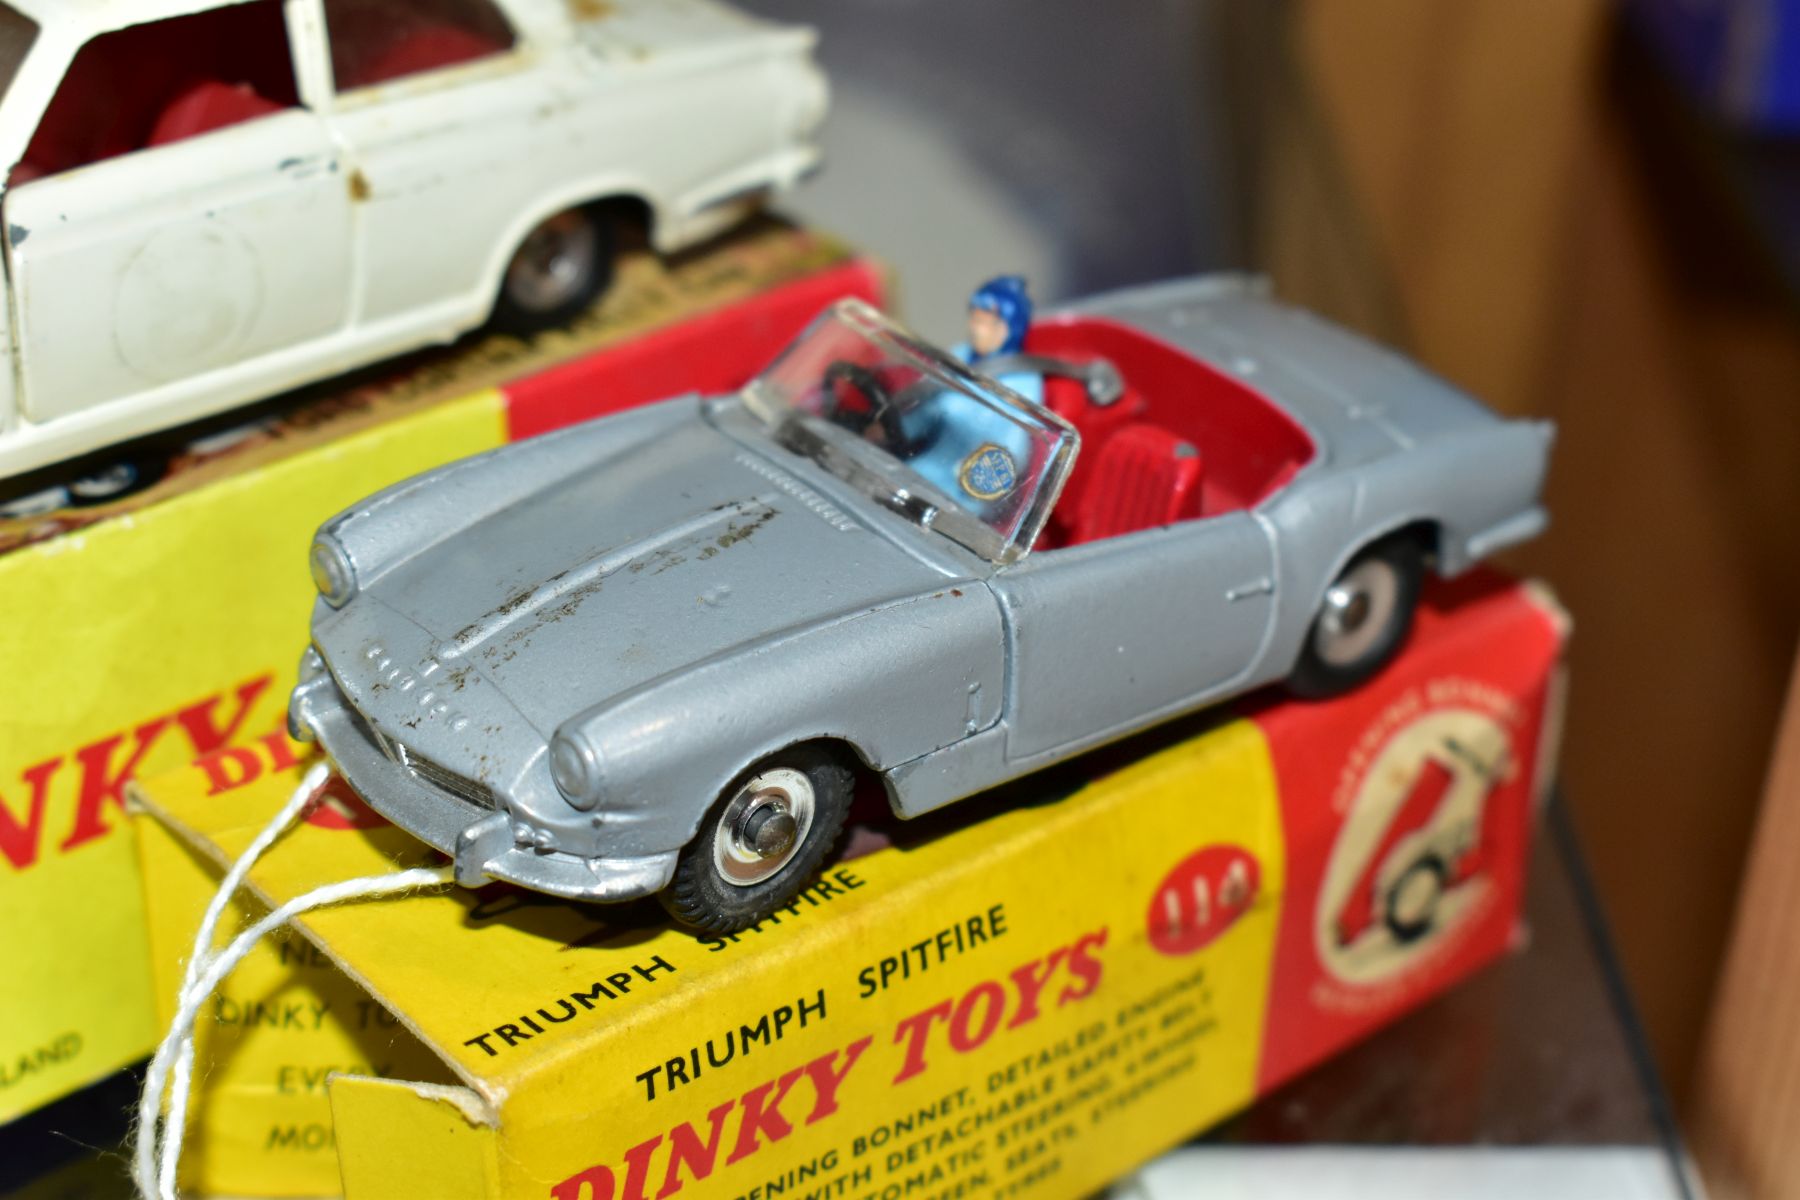 THREE BOXED DINKY TOYS CARS, Truimph Spitfire, No 114 metallic silver grey body, red interior, - Image 2 of 9